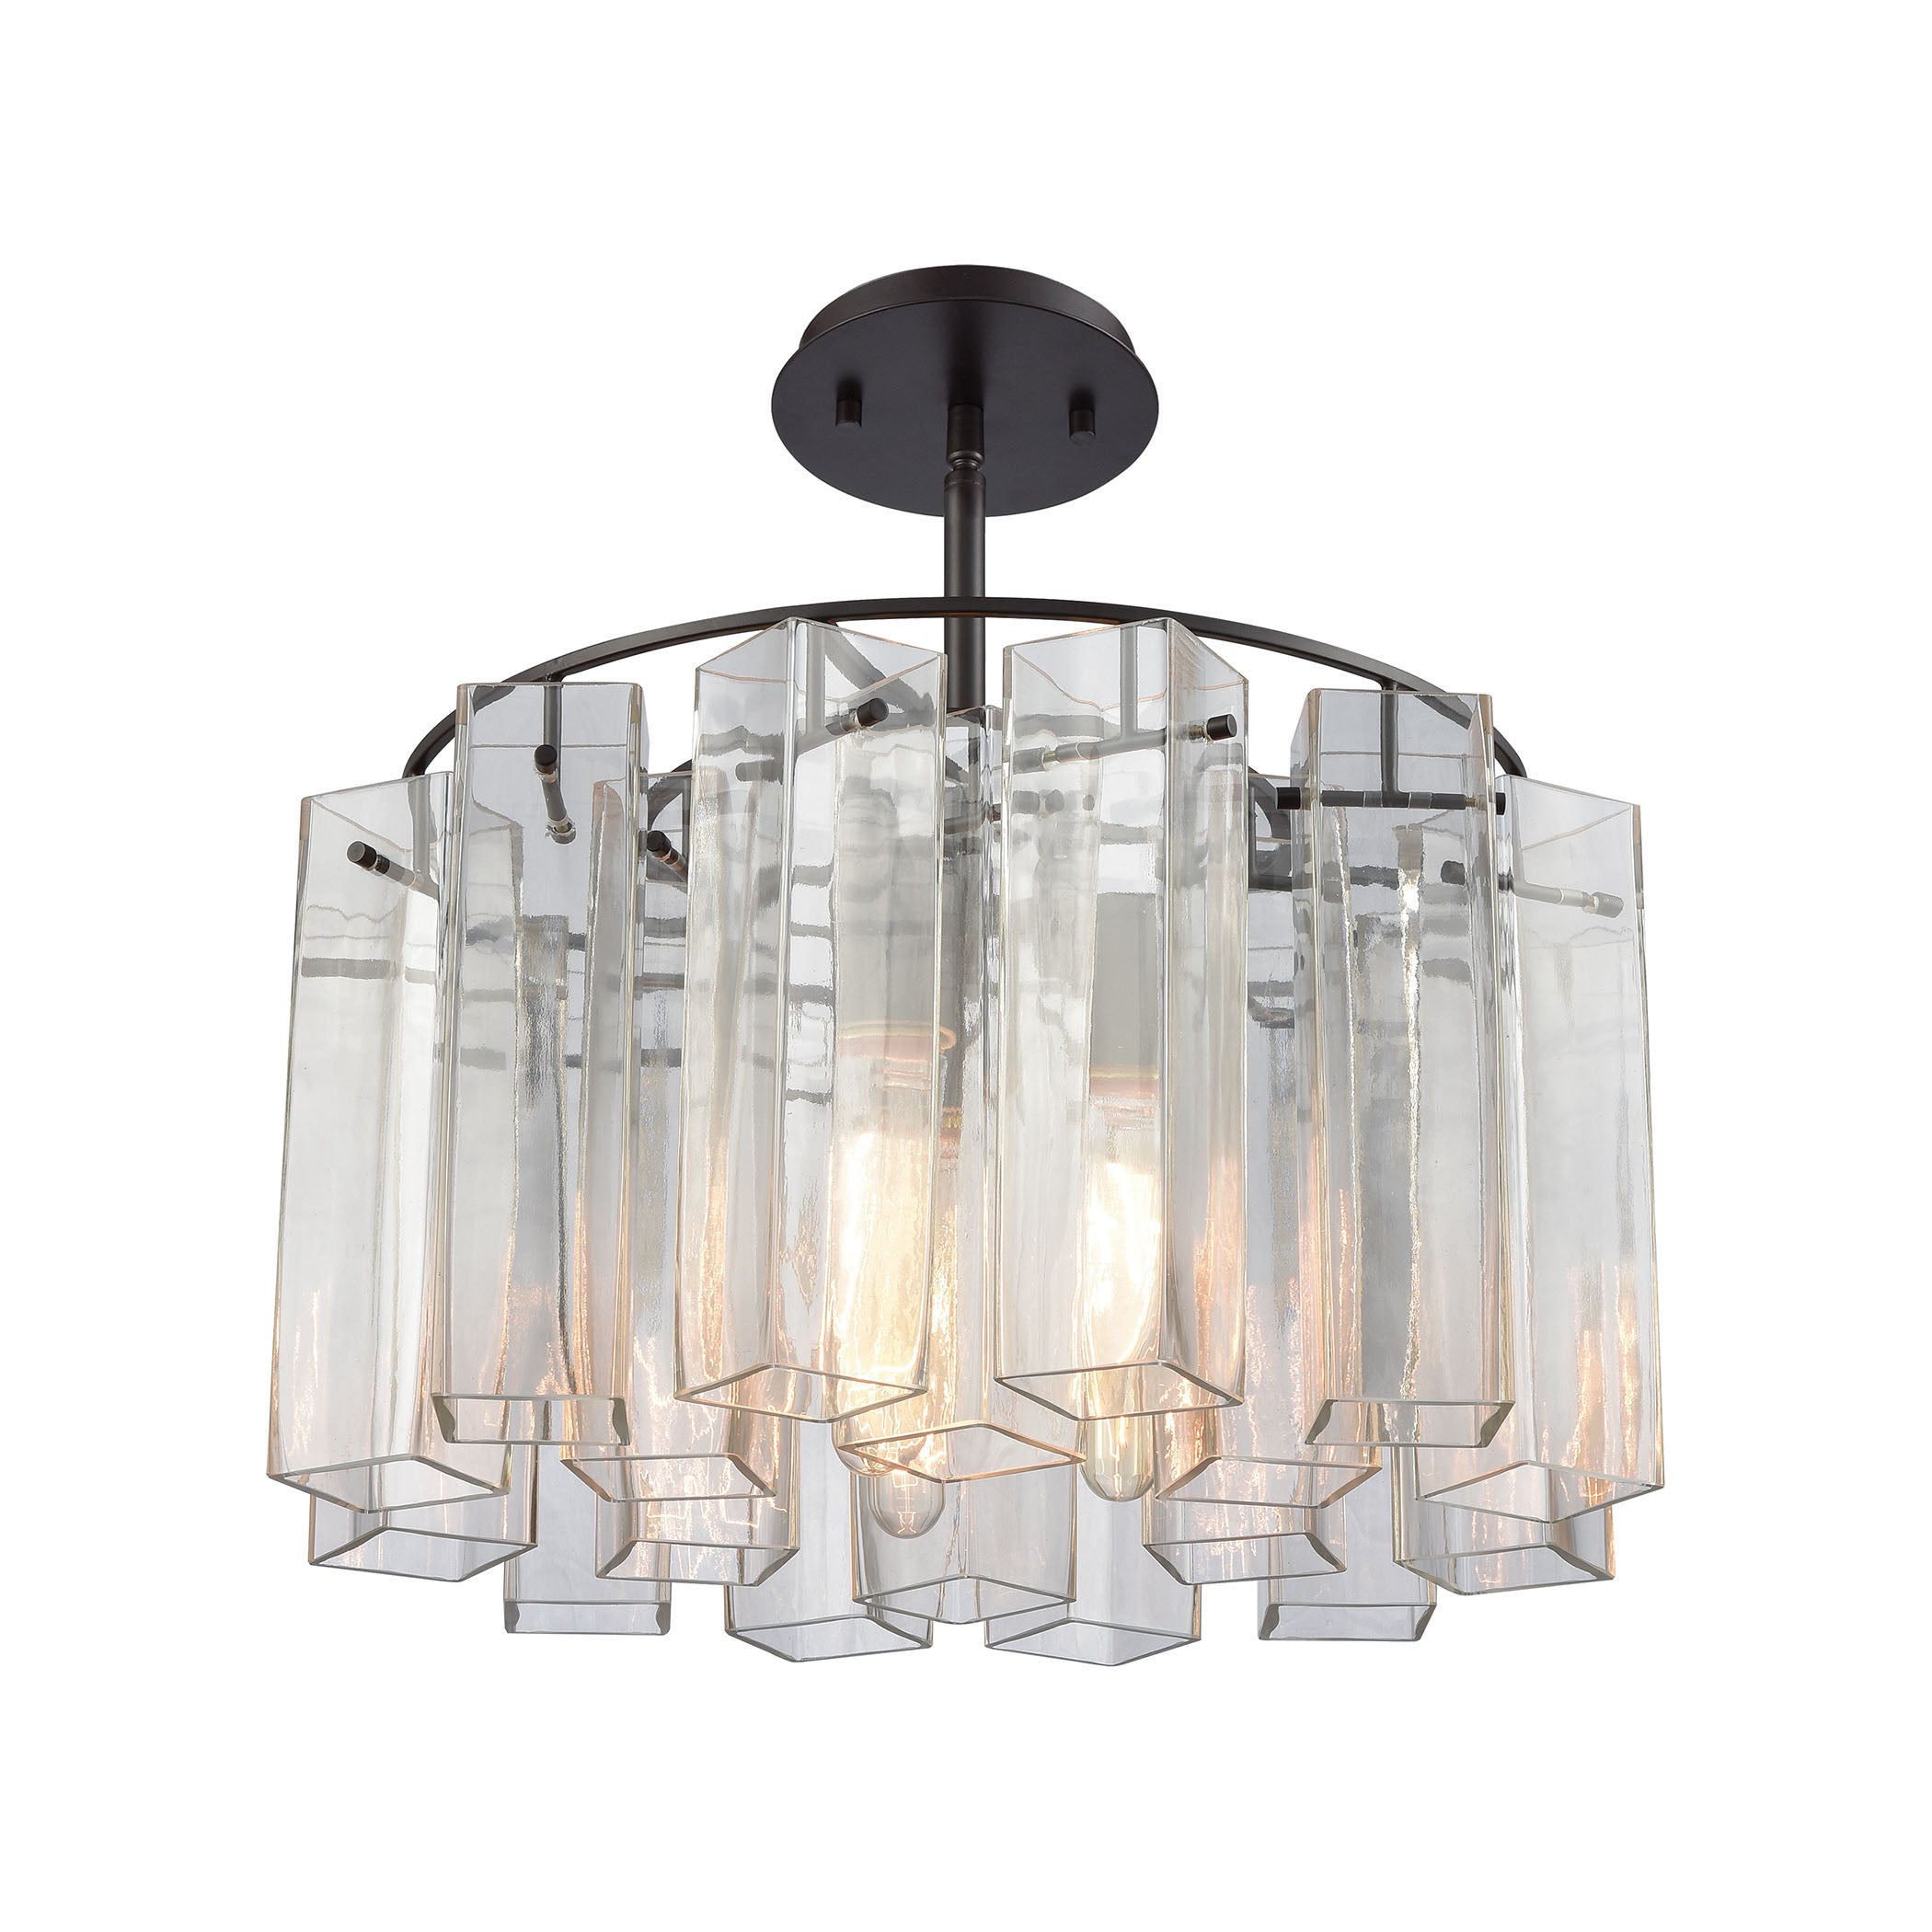 ELK Lighting 11162/3 Cubic Glass 3-Light Chandelier in Oil Rubbed Bronze with Clear Glass Square Tubes